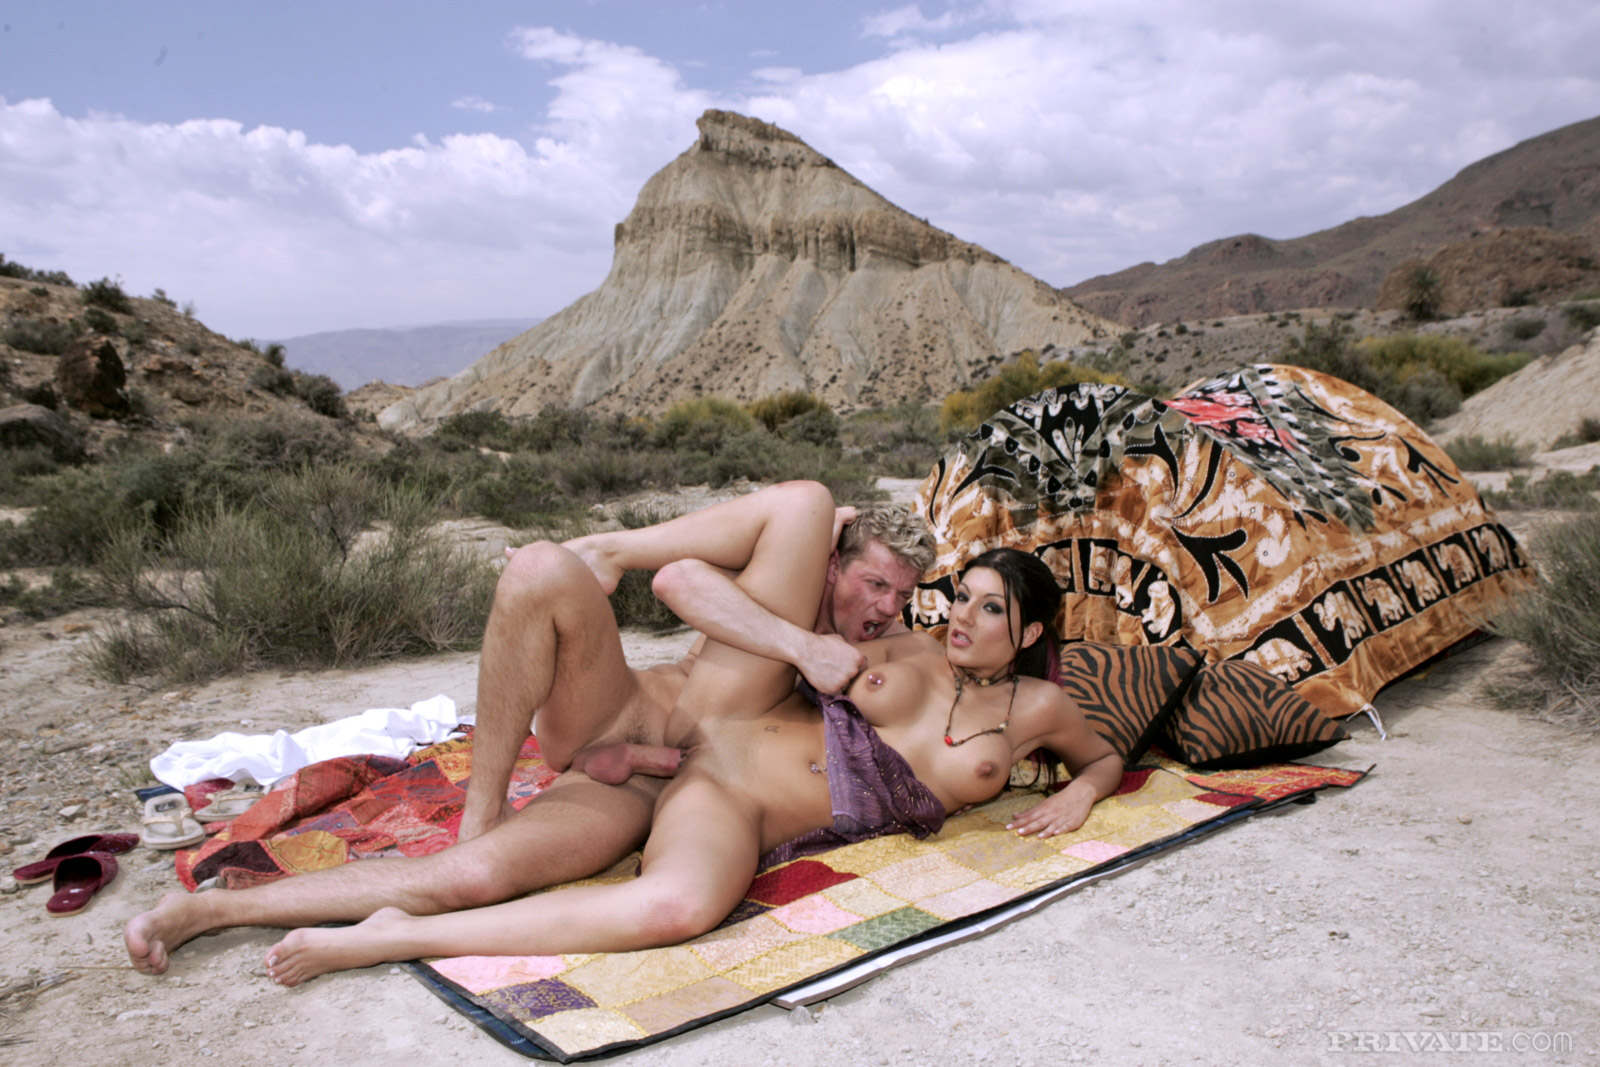 cathy eaves add photo porn in the desert